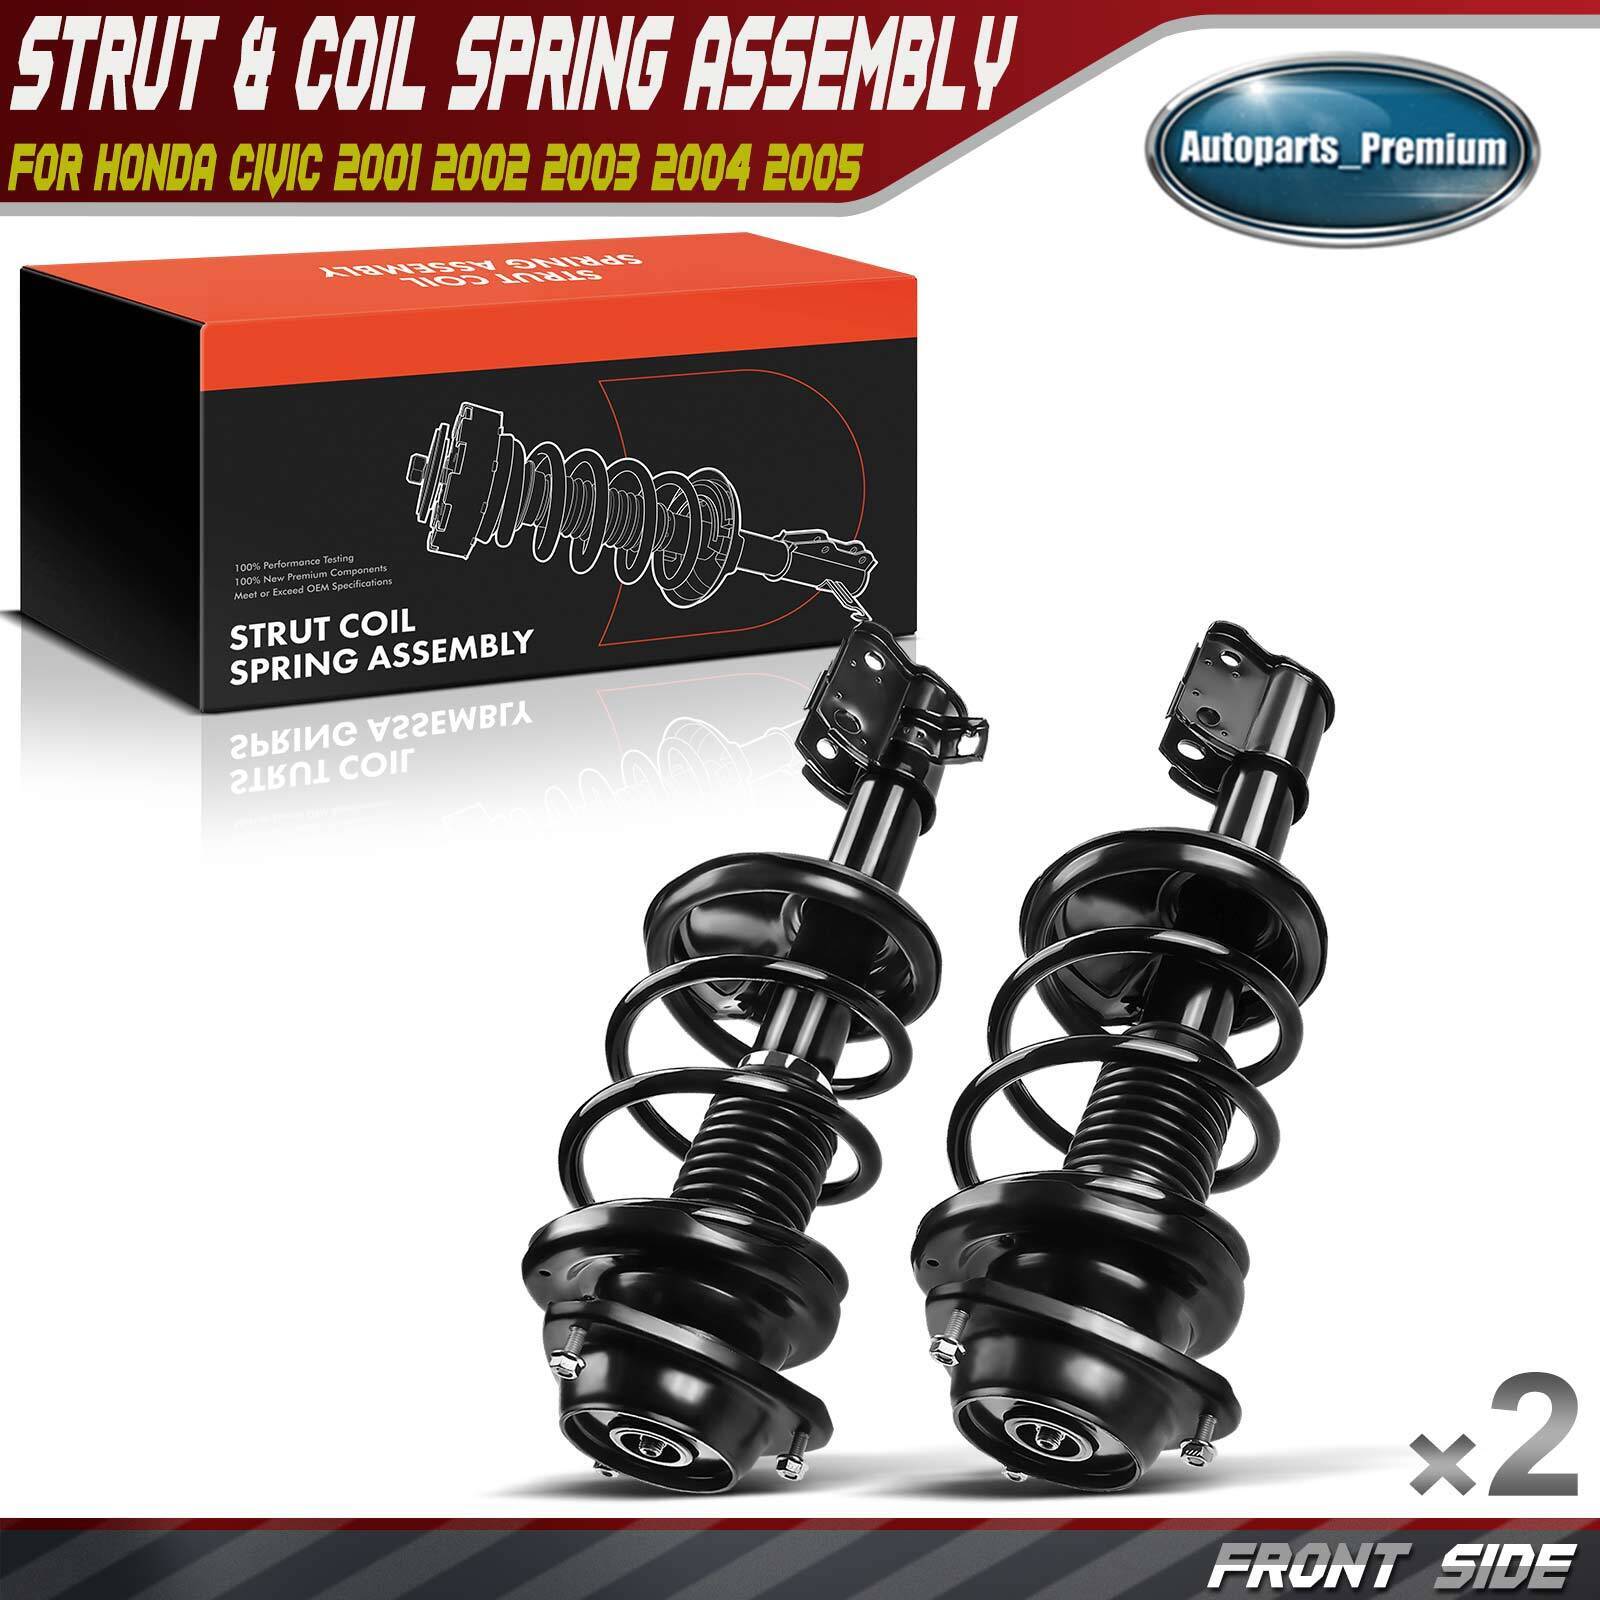 2x Front Complete Strut & Coil Spring Assembly for Subaru Impreza 1993-2001 AWD